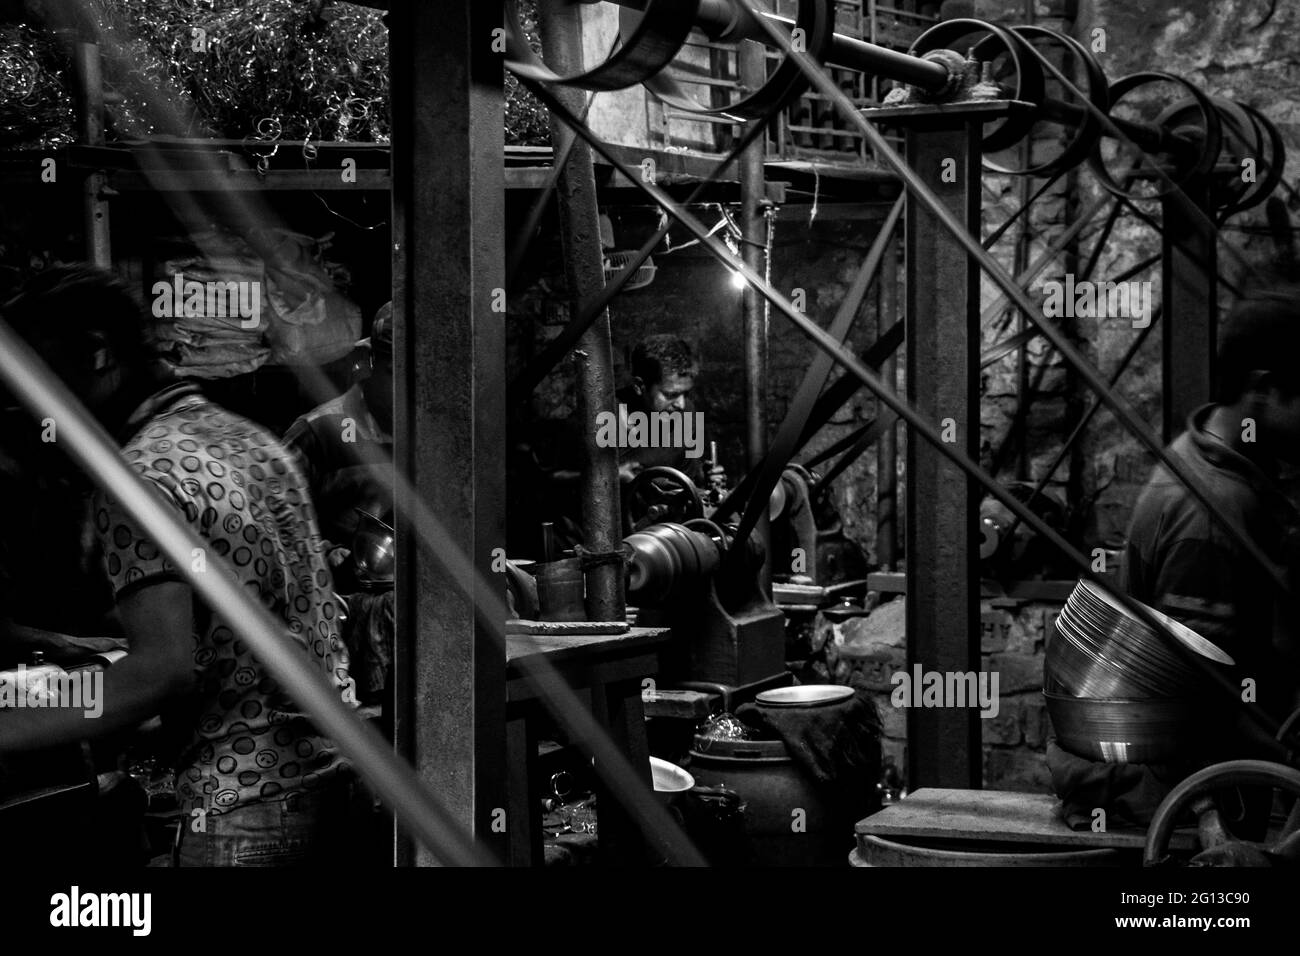 Working motion of people in an aluminum  factory, This image captured on 13th February 2019 from Dhaka, Bangladesh, South  Asia Stock Photo